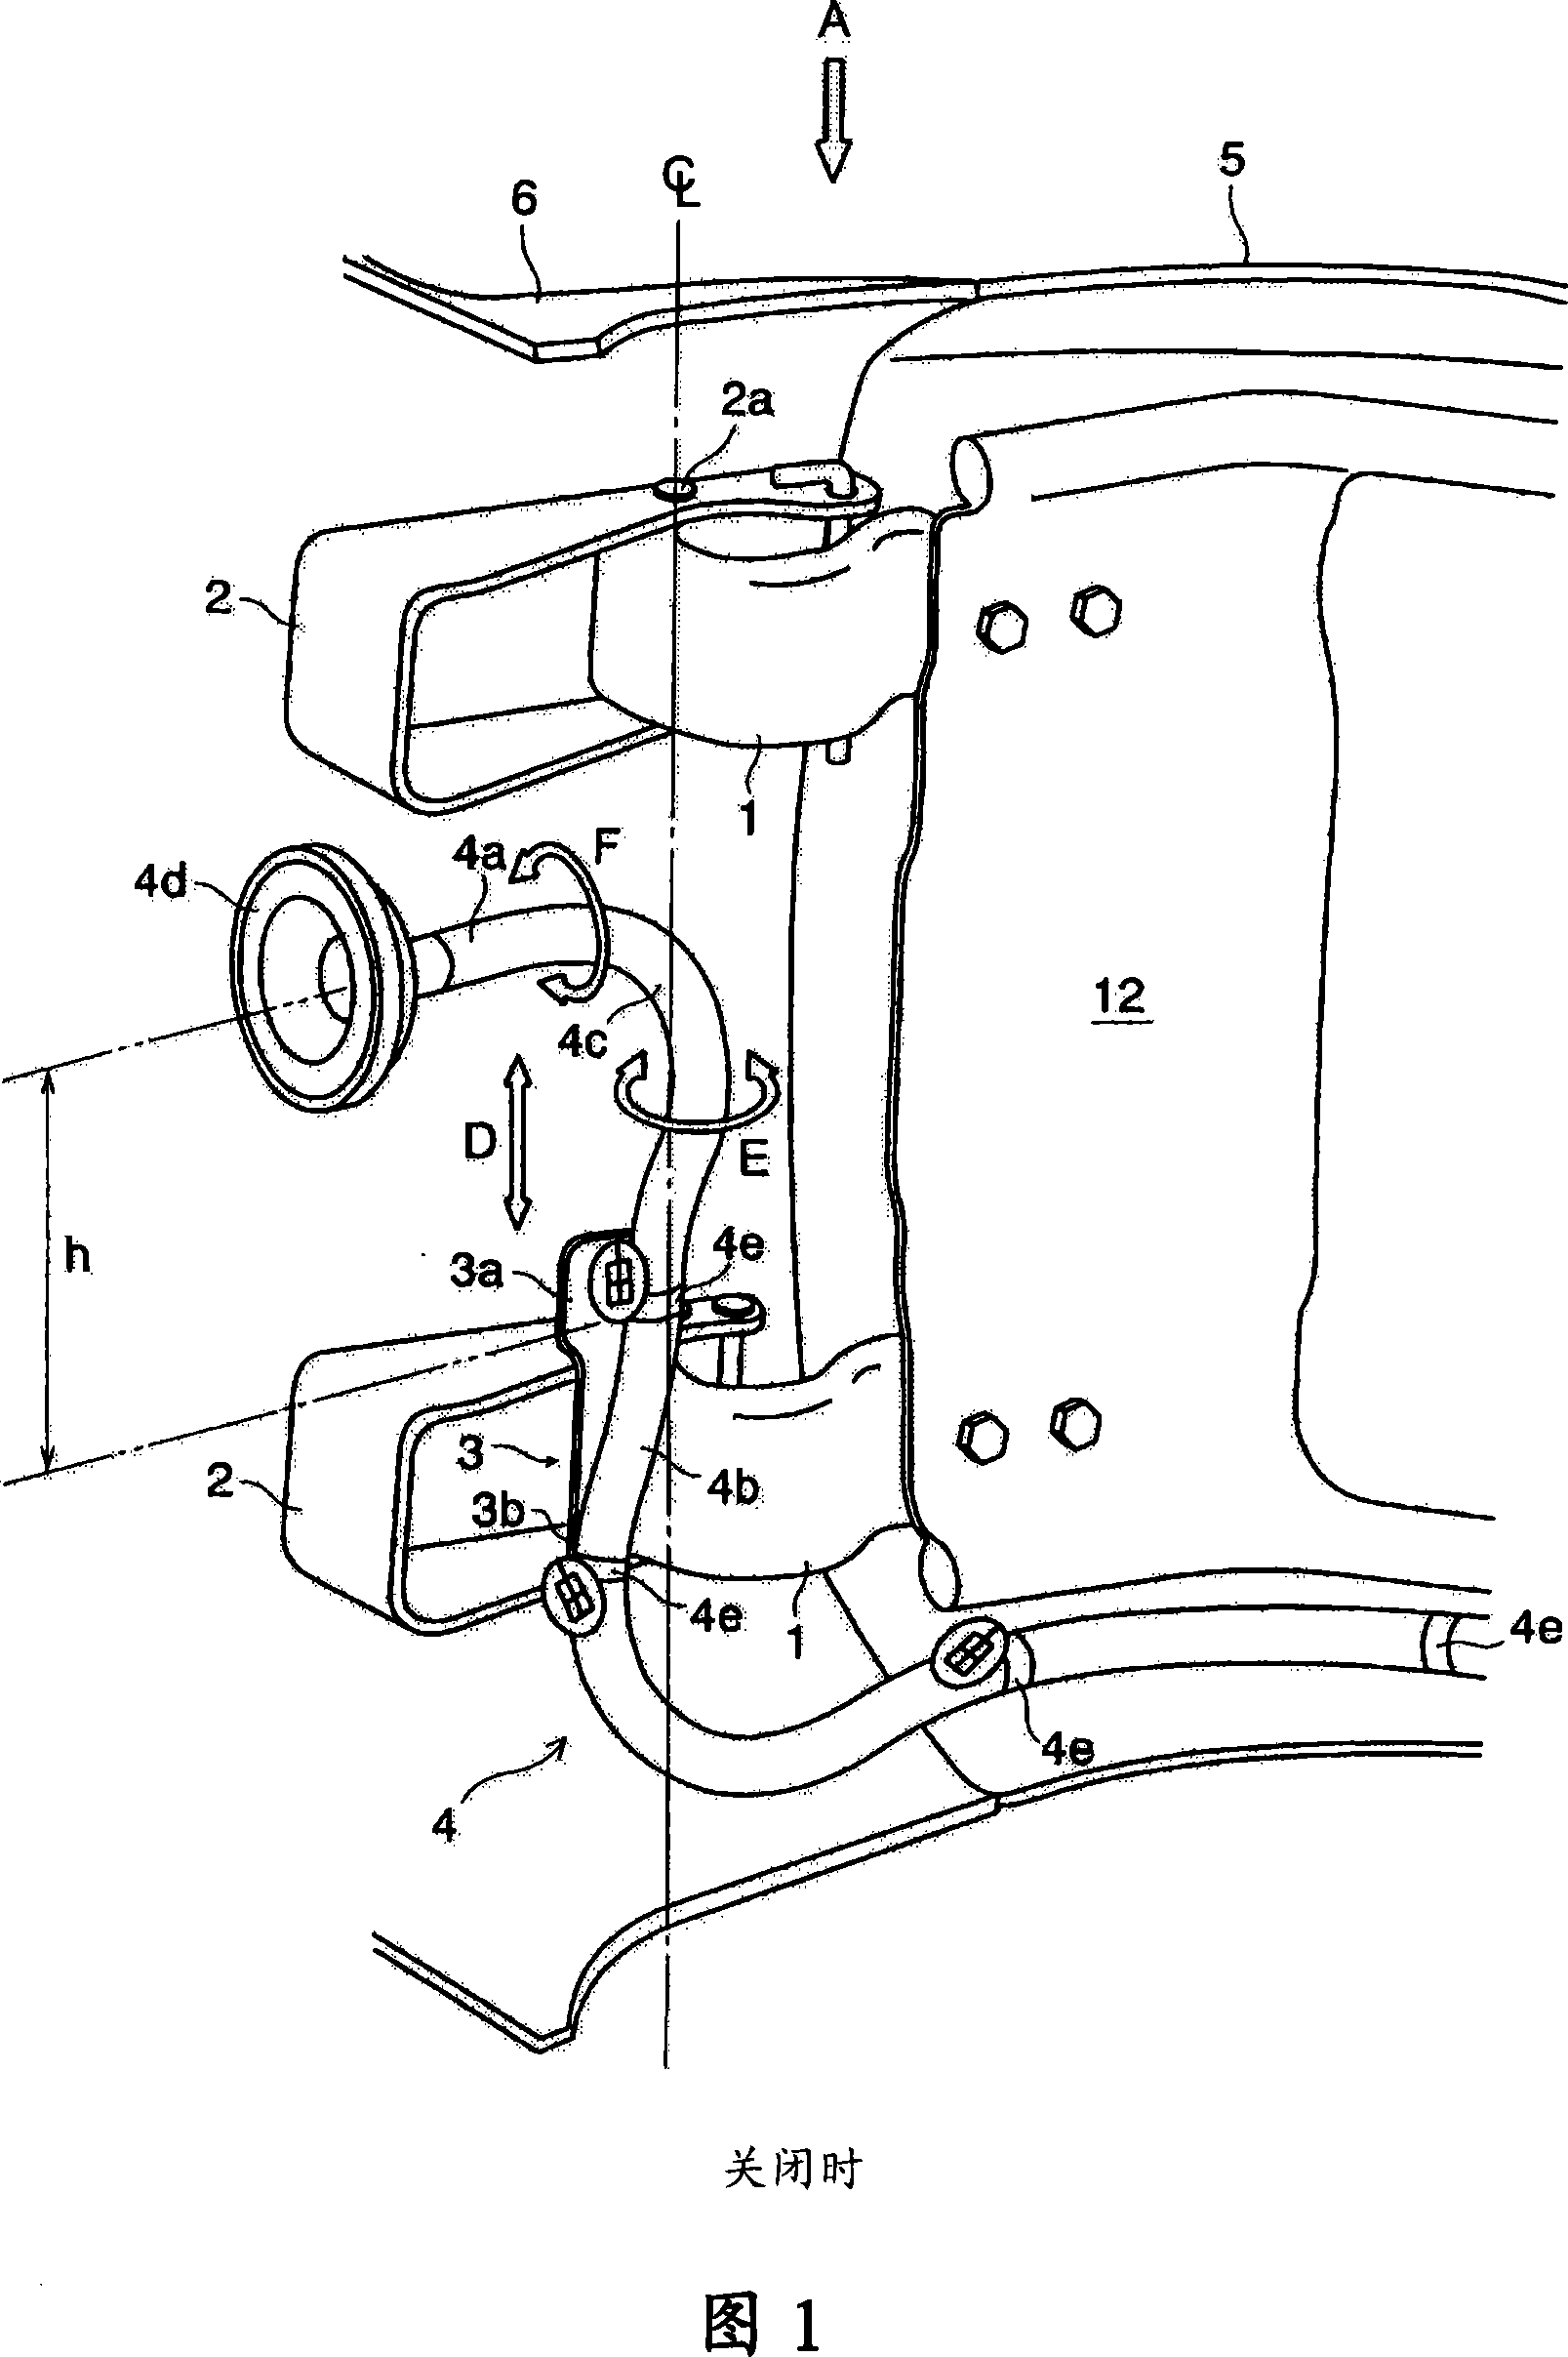 Open close structure of vehicle cover parts